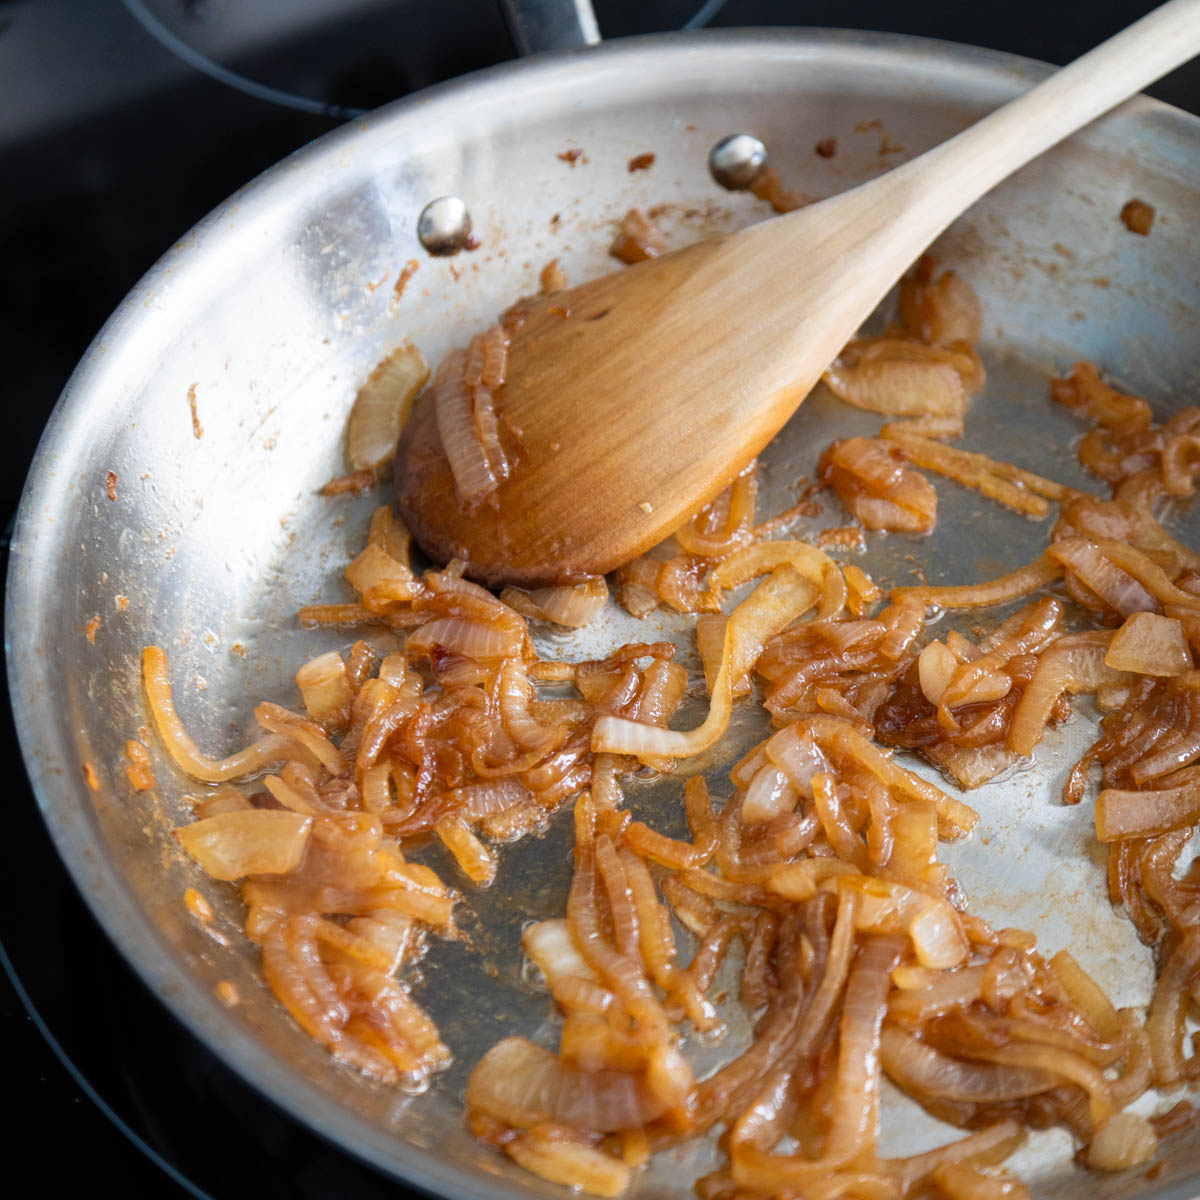 A skillet has caramelized onions being stirred by a wooden spoon.